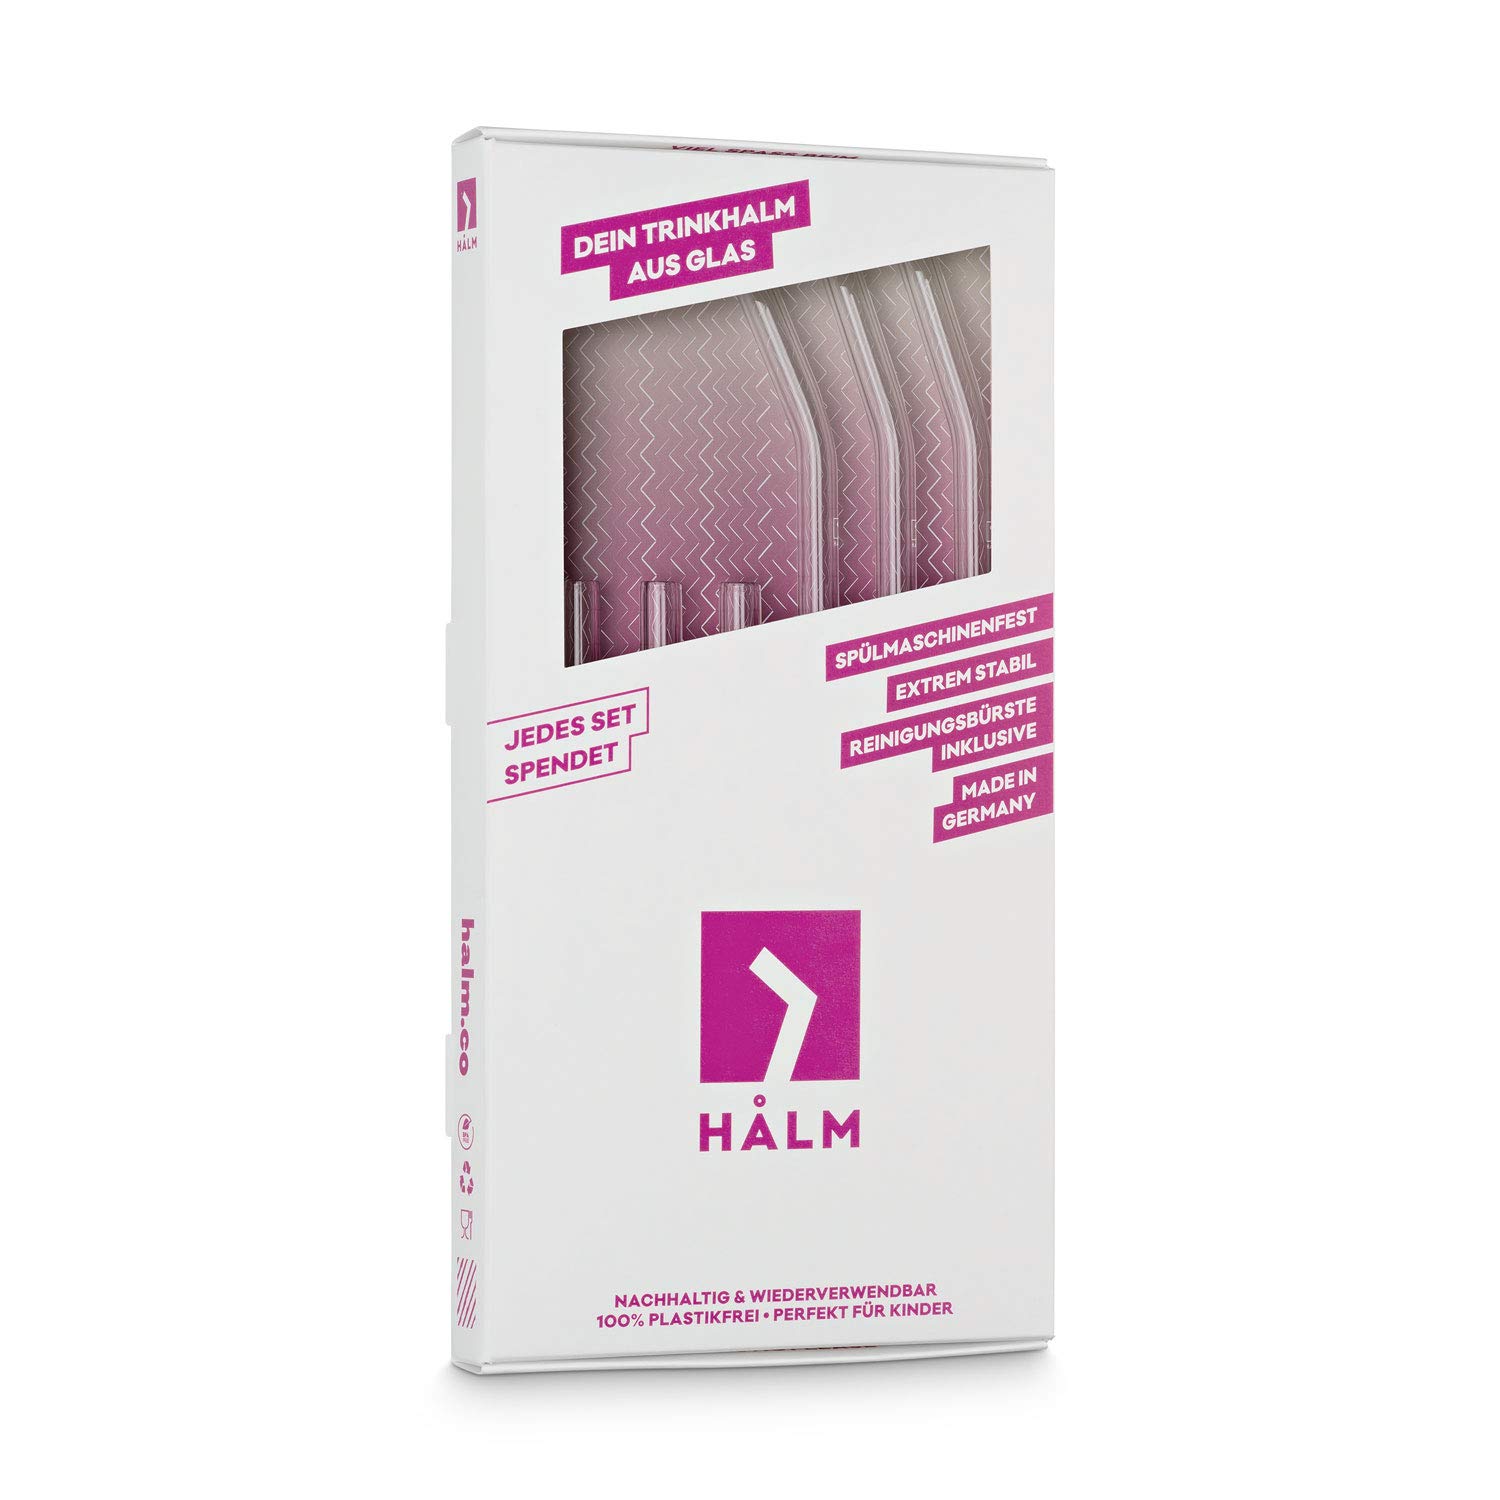 HALM Glass Straws - Variety Pack: 6 Reusable Drinking Straws in 2 Sizes + Plastic-Free Cleaning Brush - Made in Germany - Dishwasher Safe - Eco-Friendly - Perfect for Smoothies, Cocktails